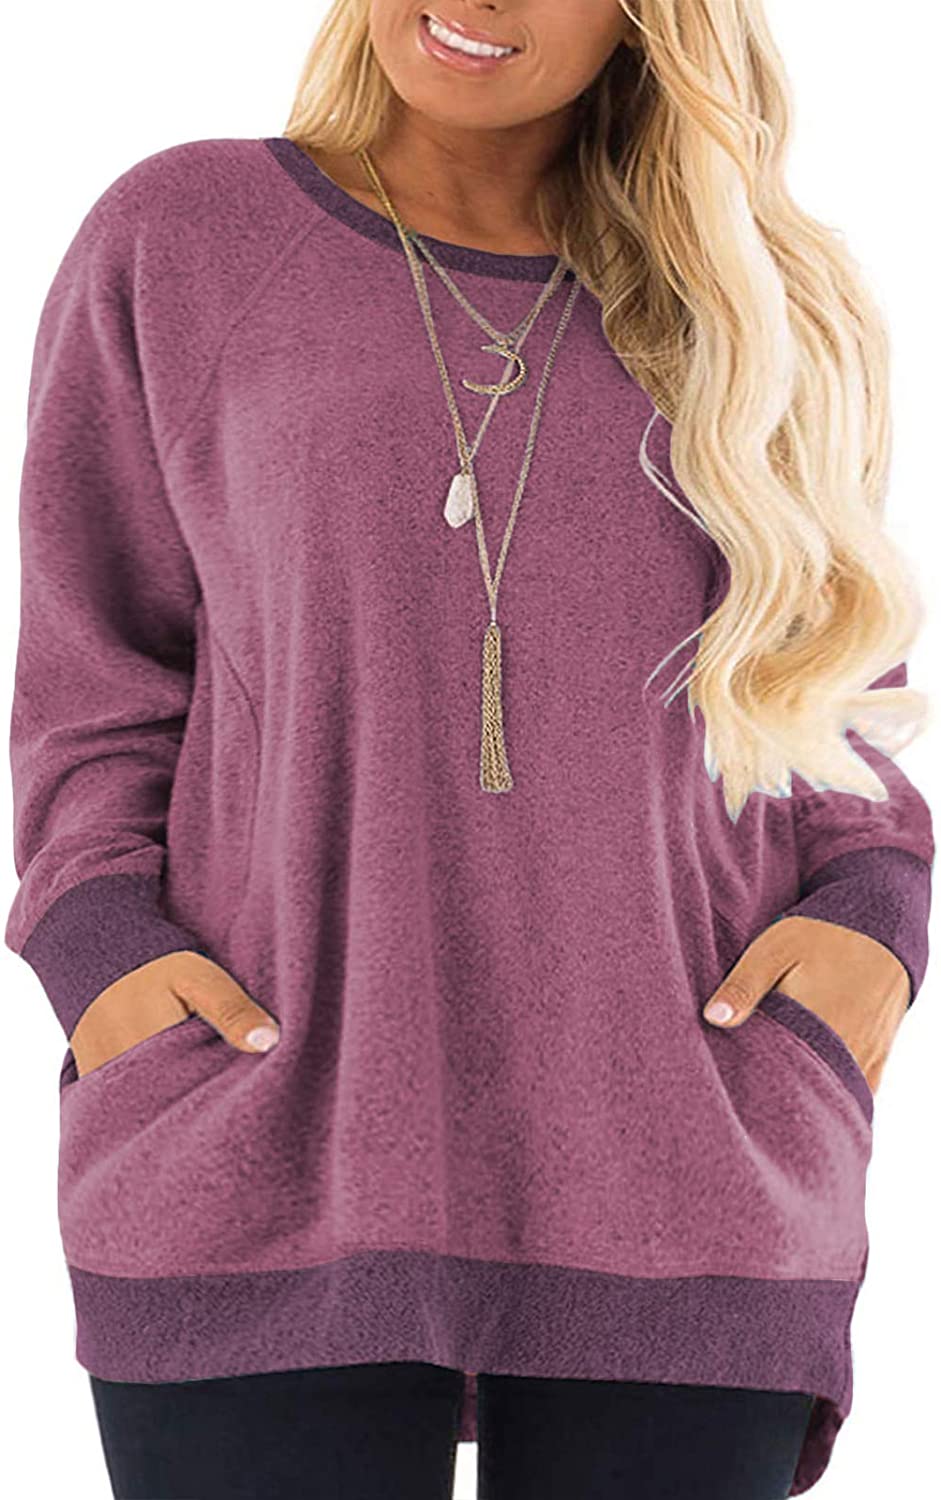 AURISSY Plus-Size Sweatshirts for Women Color Block Tops Shirts with Pocket 